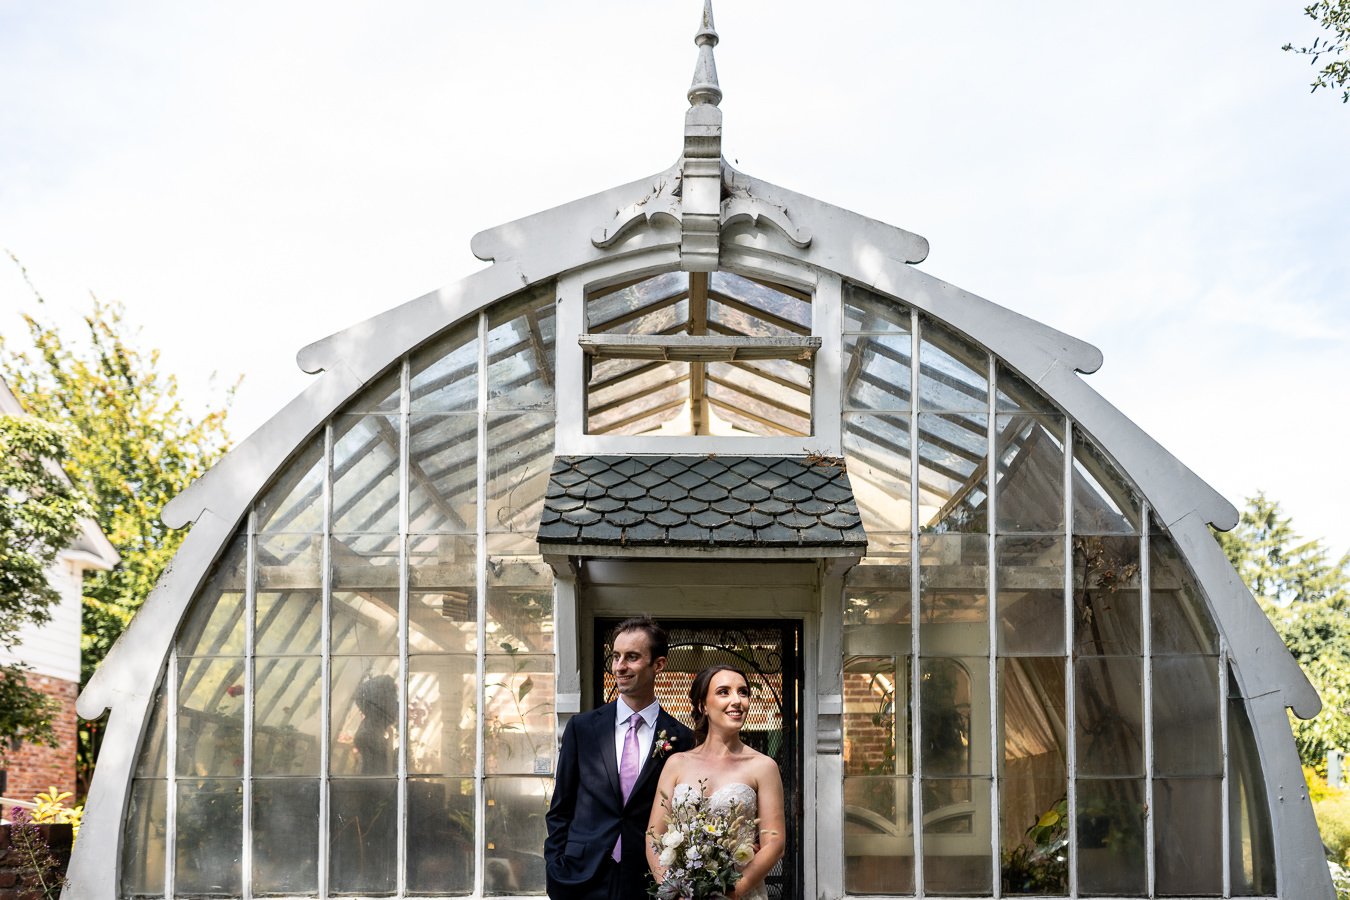 Portraits at Luther Burbank Gardens | Barndiva Wedding Photo by Duy Ho